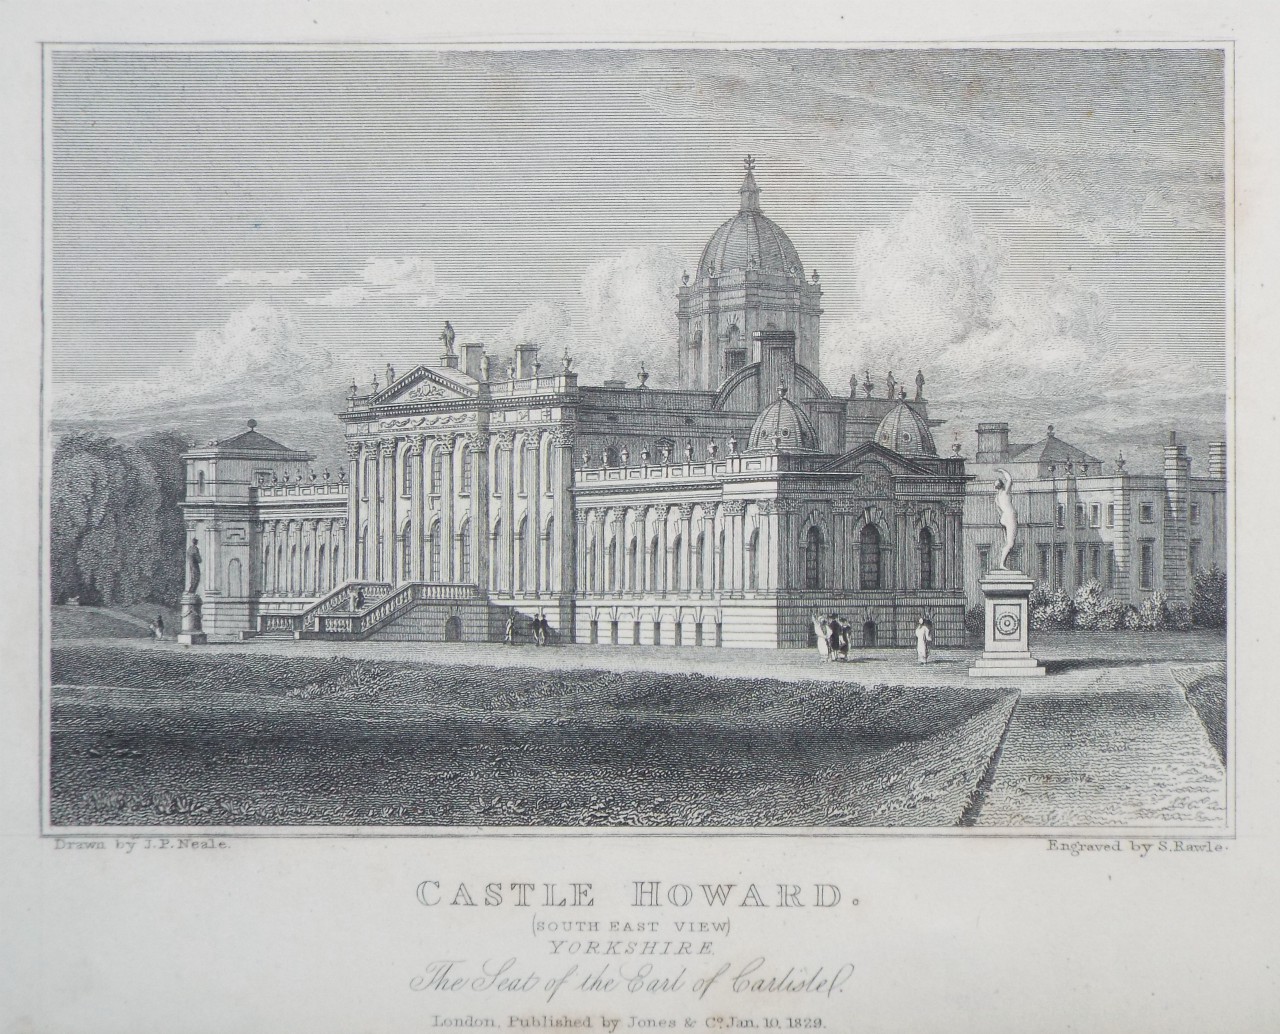 Print - Castle Howard. (South East View) Yorkshire. The Seat of the Earl of Carlisle. - Rawle